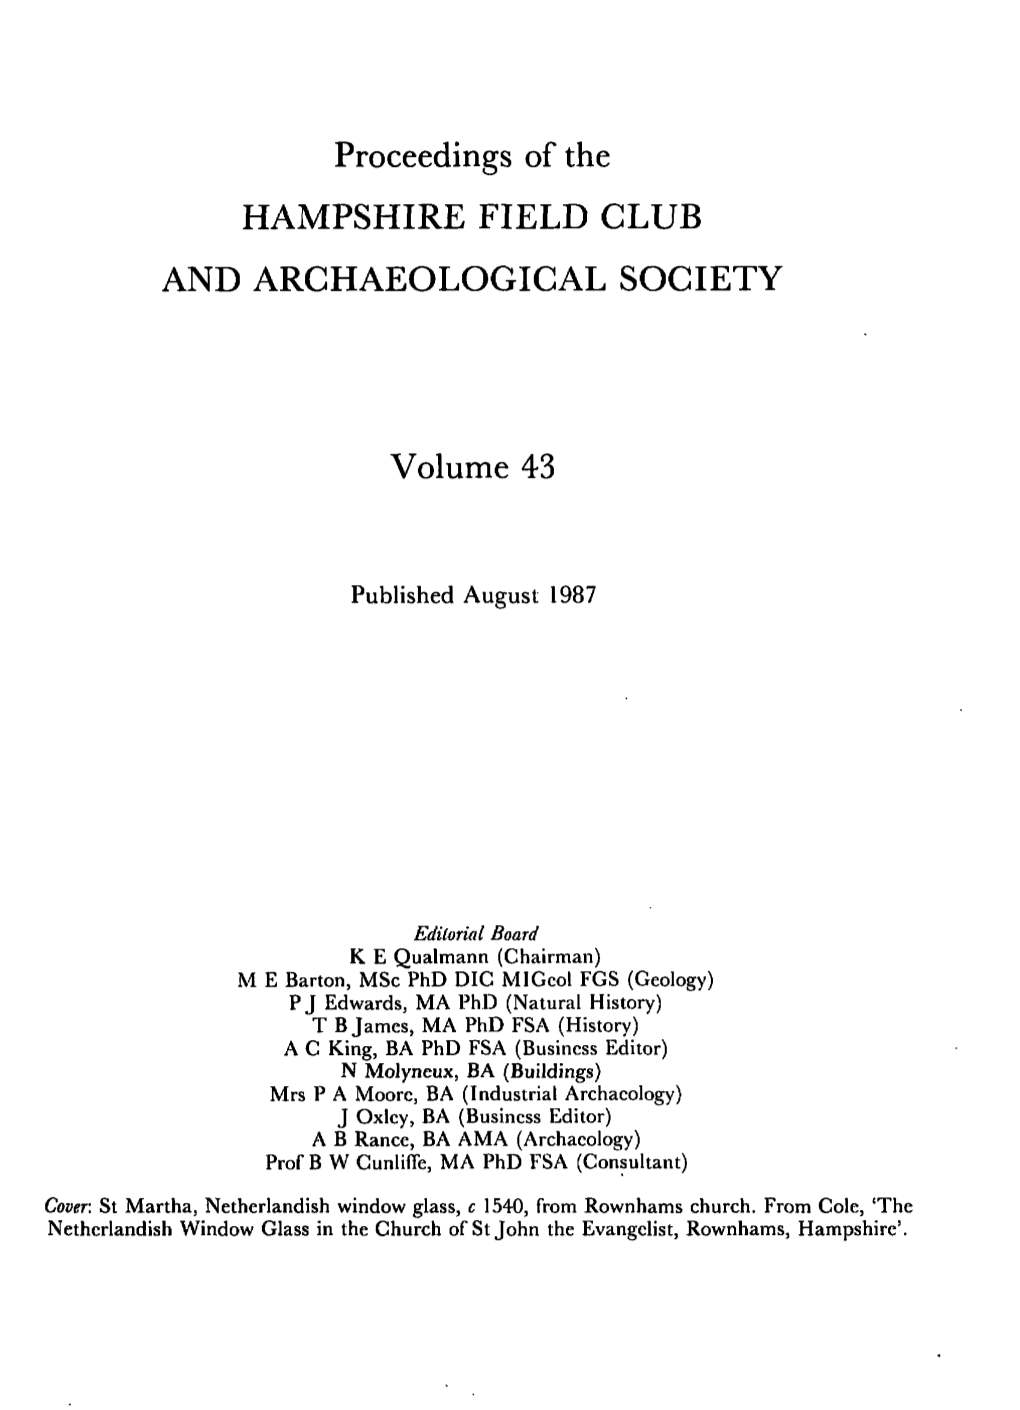 Proceedings of the HAMPSHIRE FIELD CLUB and ARCHAEOLOGICAL SOCIETY